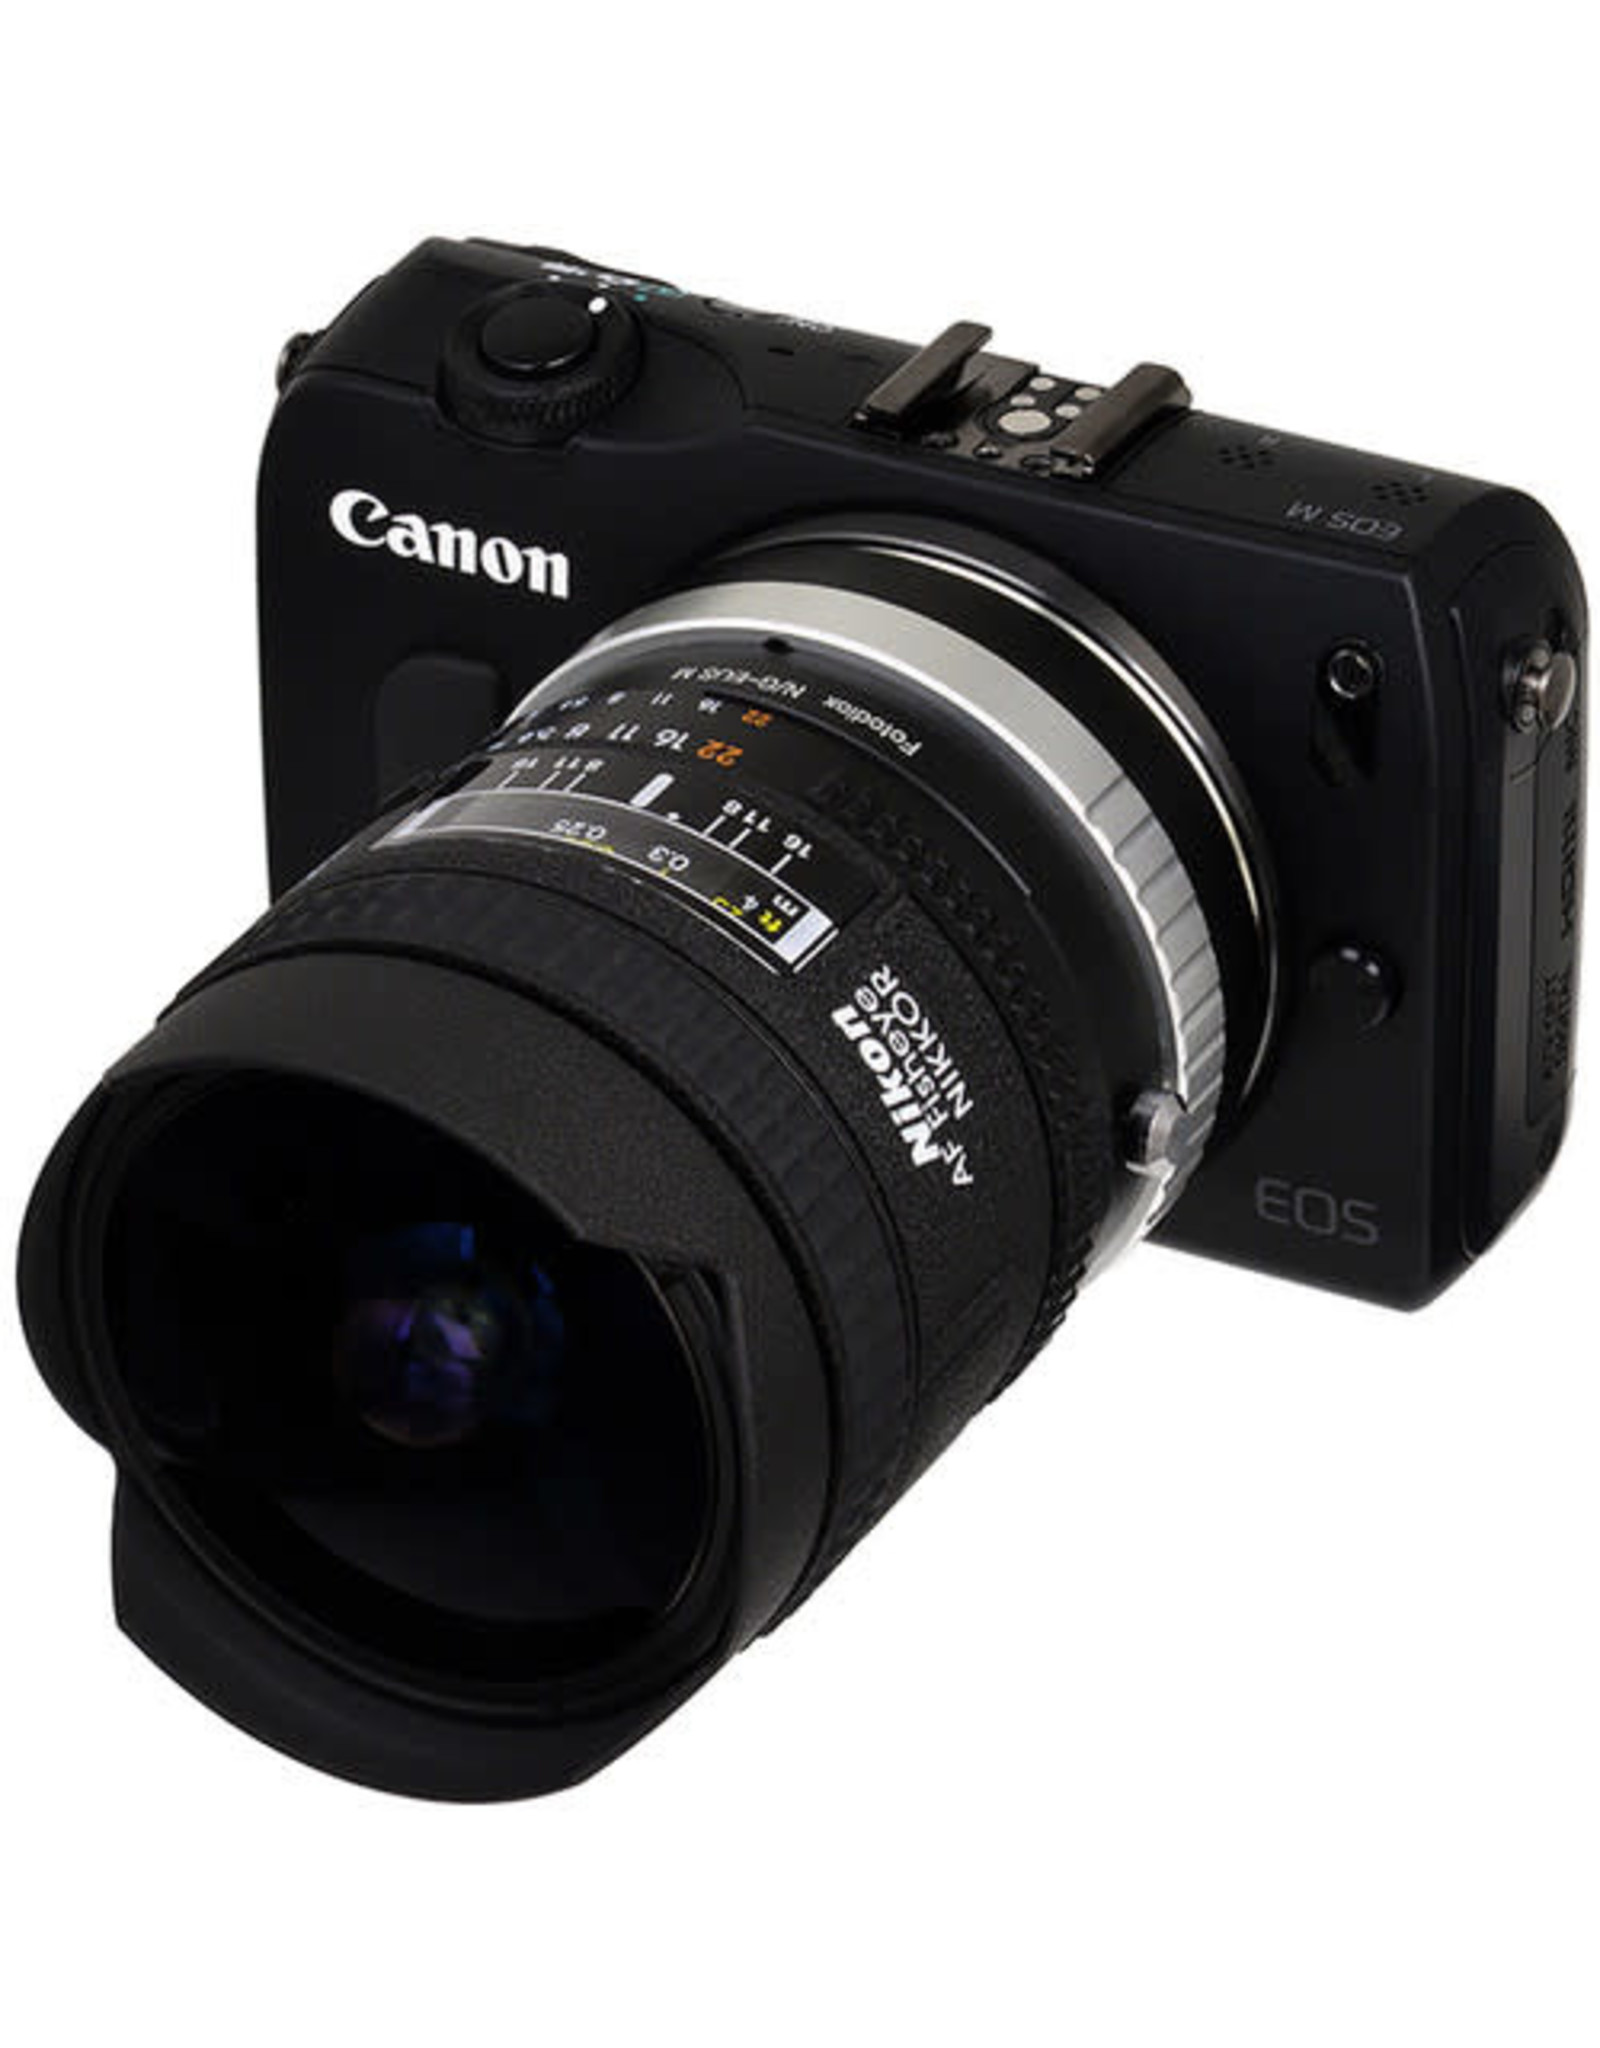 Fotodiox Mount Adapter (Canon FD Lens to CANON EOS M Body)